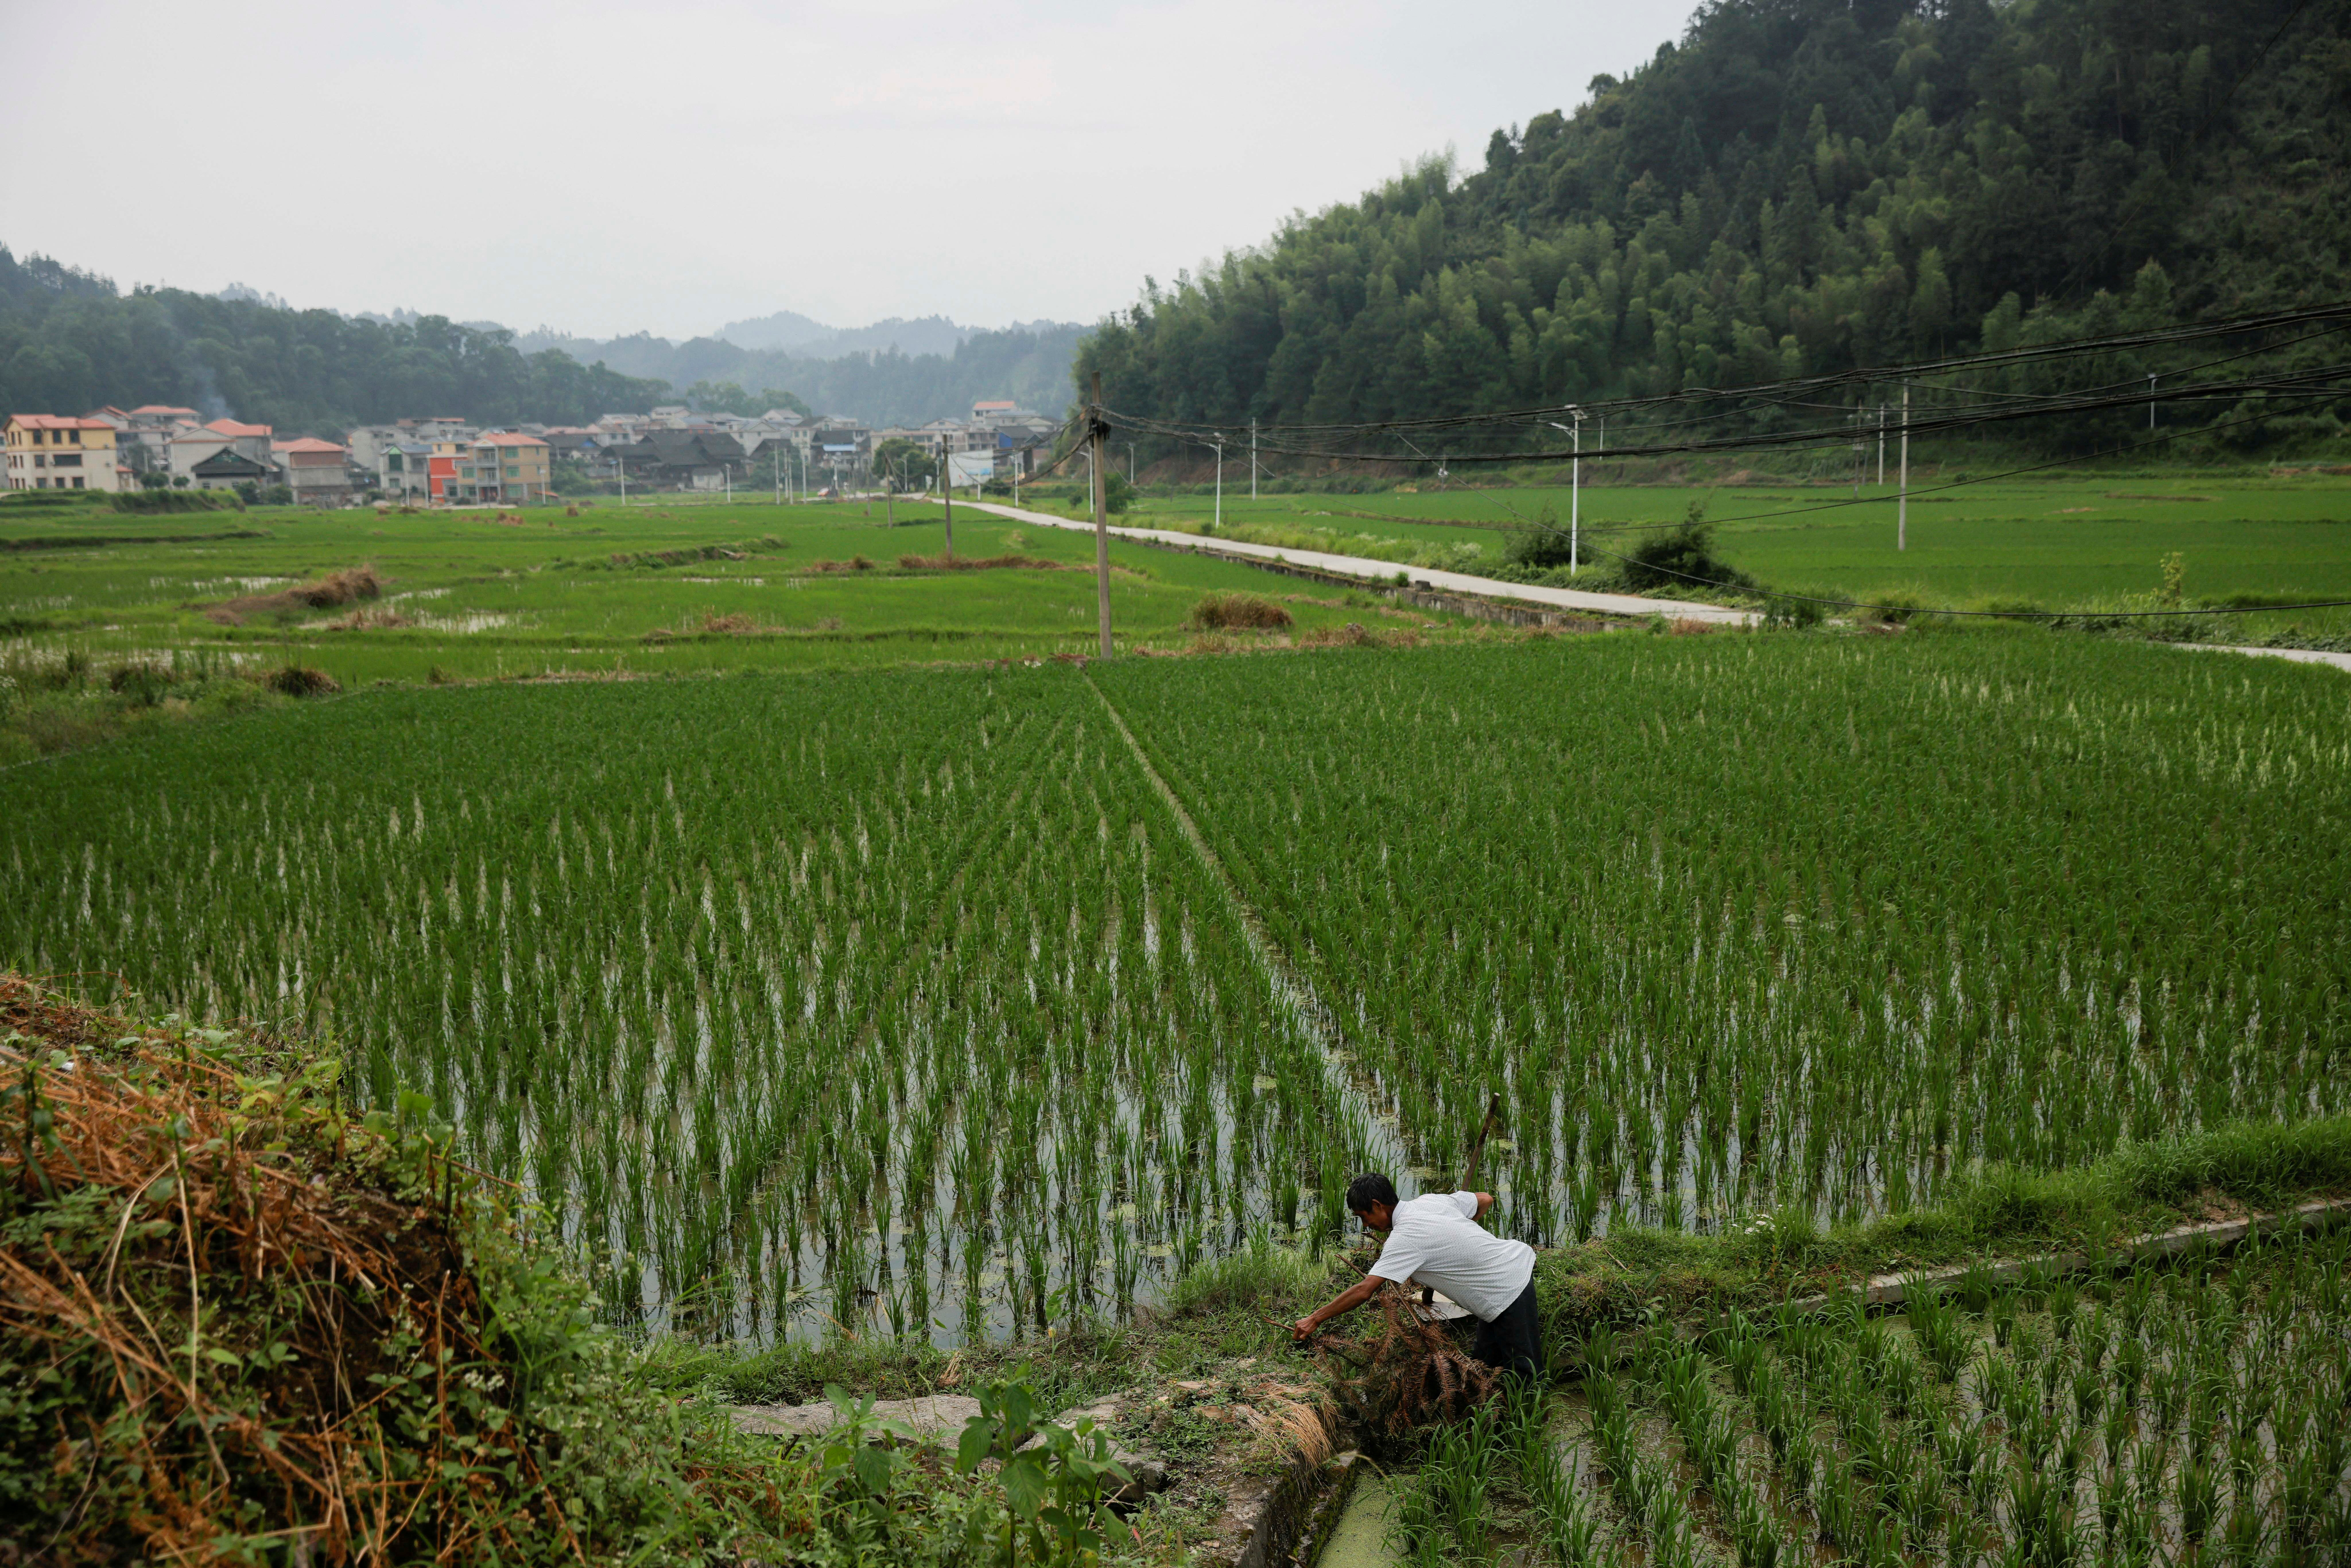 A farmer tends to his rice field the village of Yangchao in Liping County